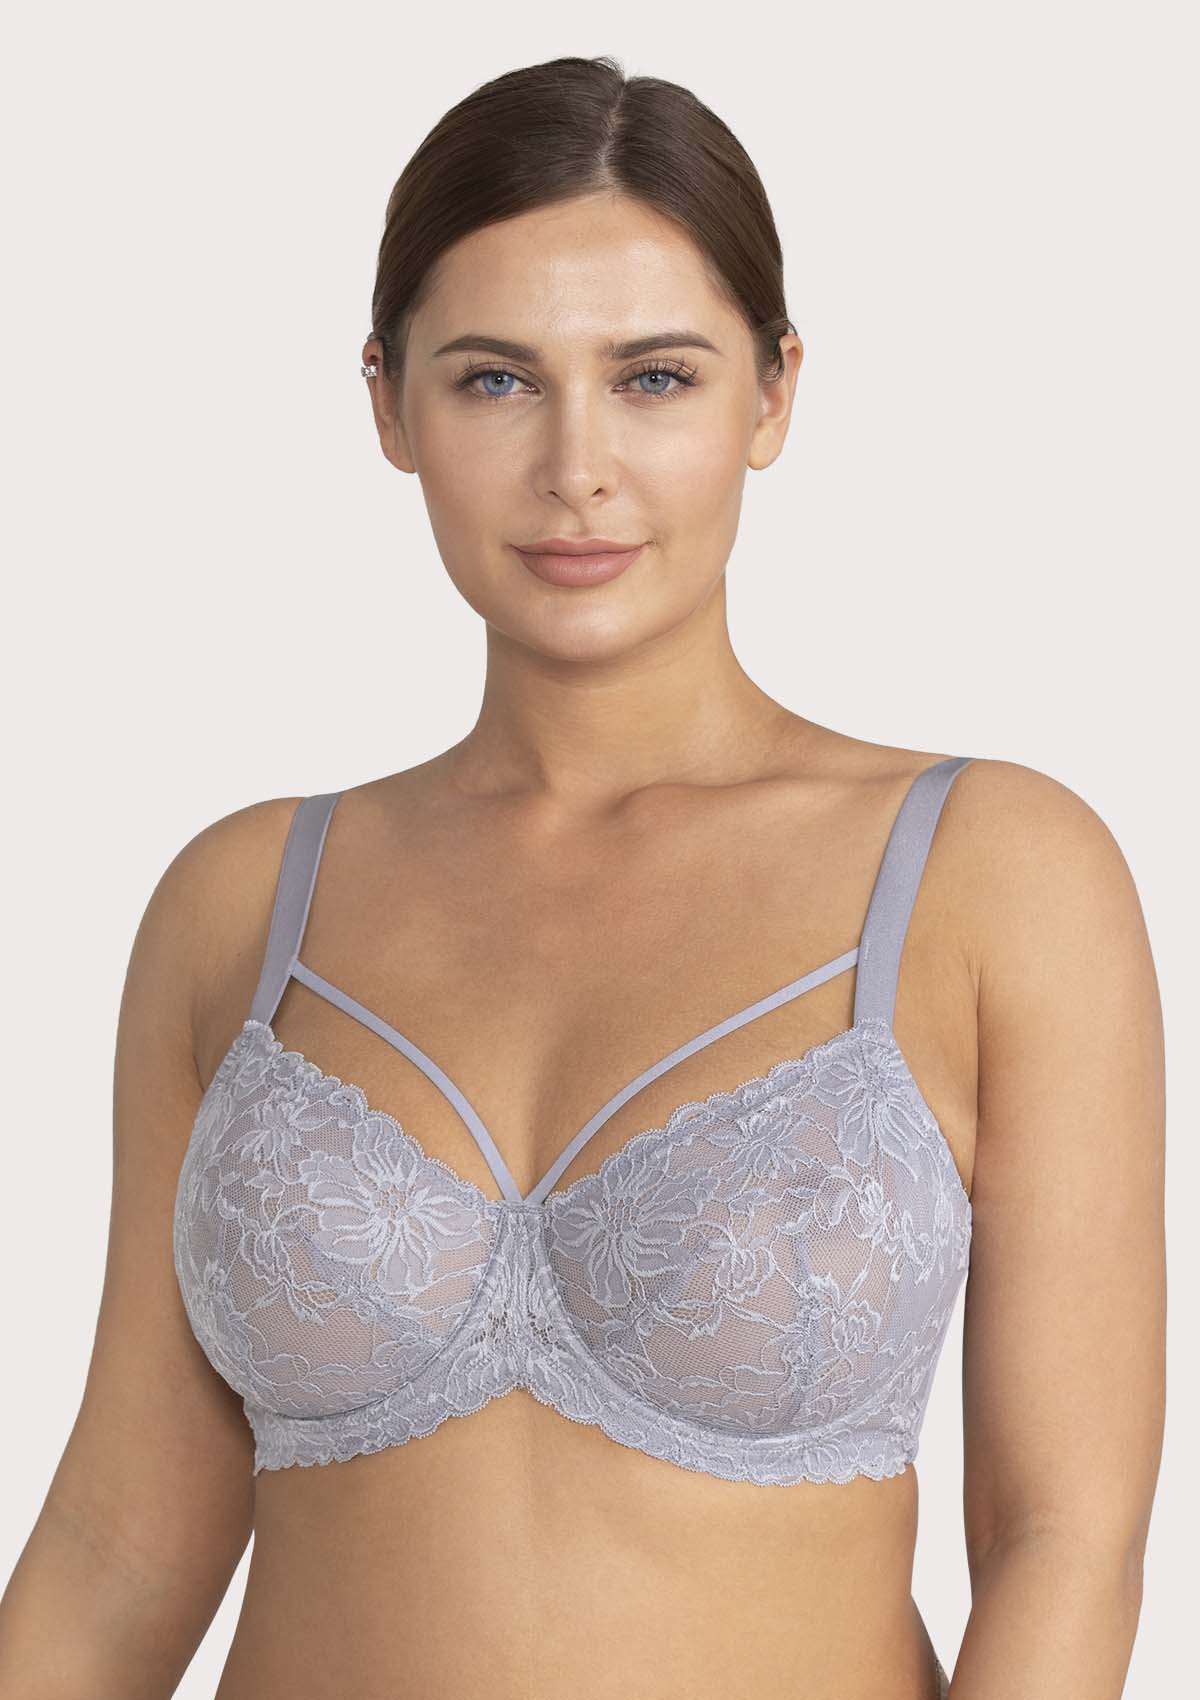 HSIA Pretty In Petals See-Through Lace Bra: Lift And Separate - Purple / 34 / C